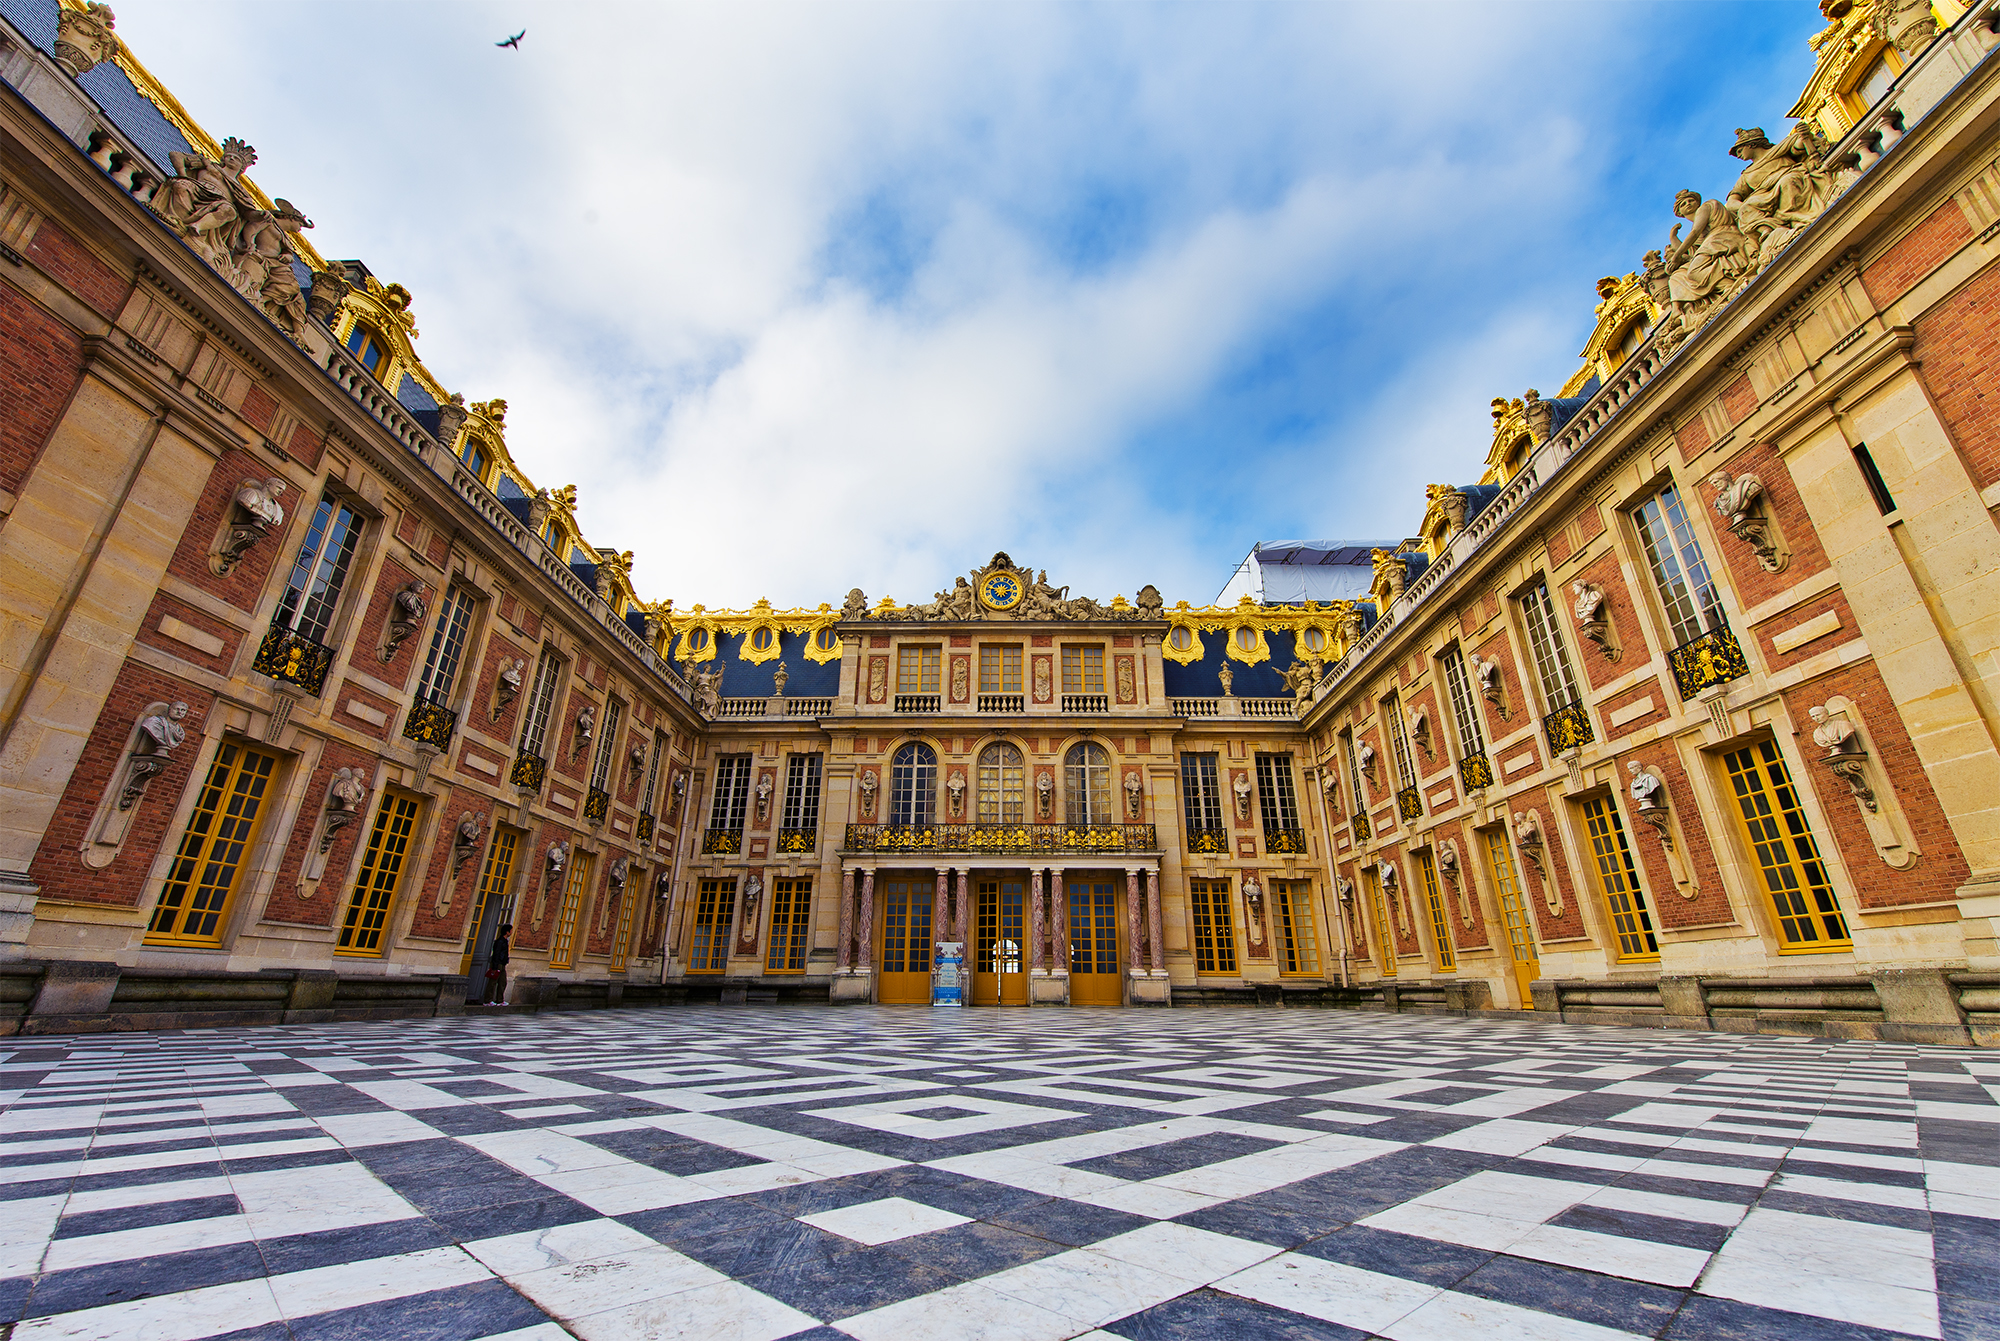 7 stunning royal palaces from around the world | Wanderlust